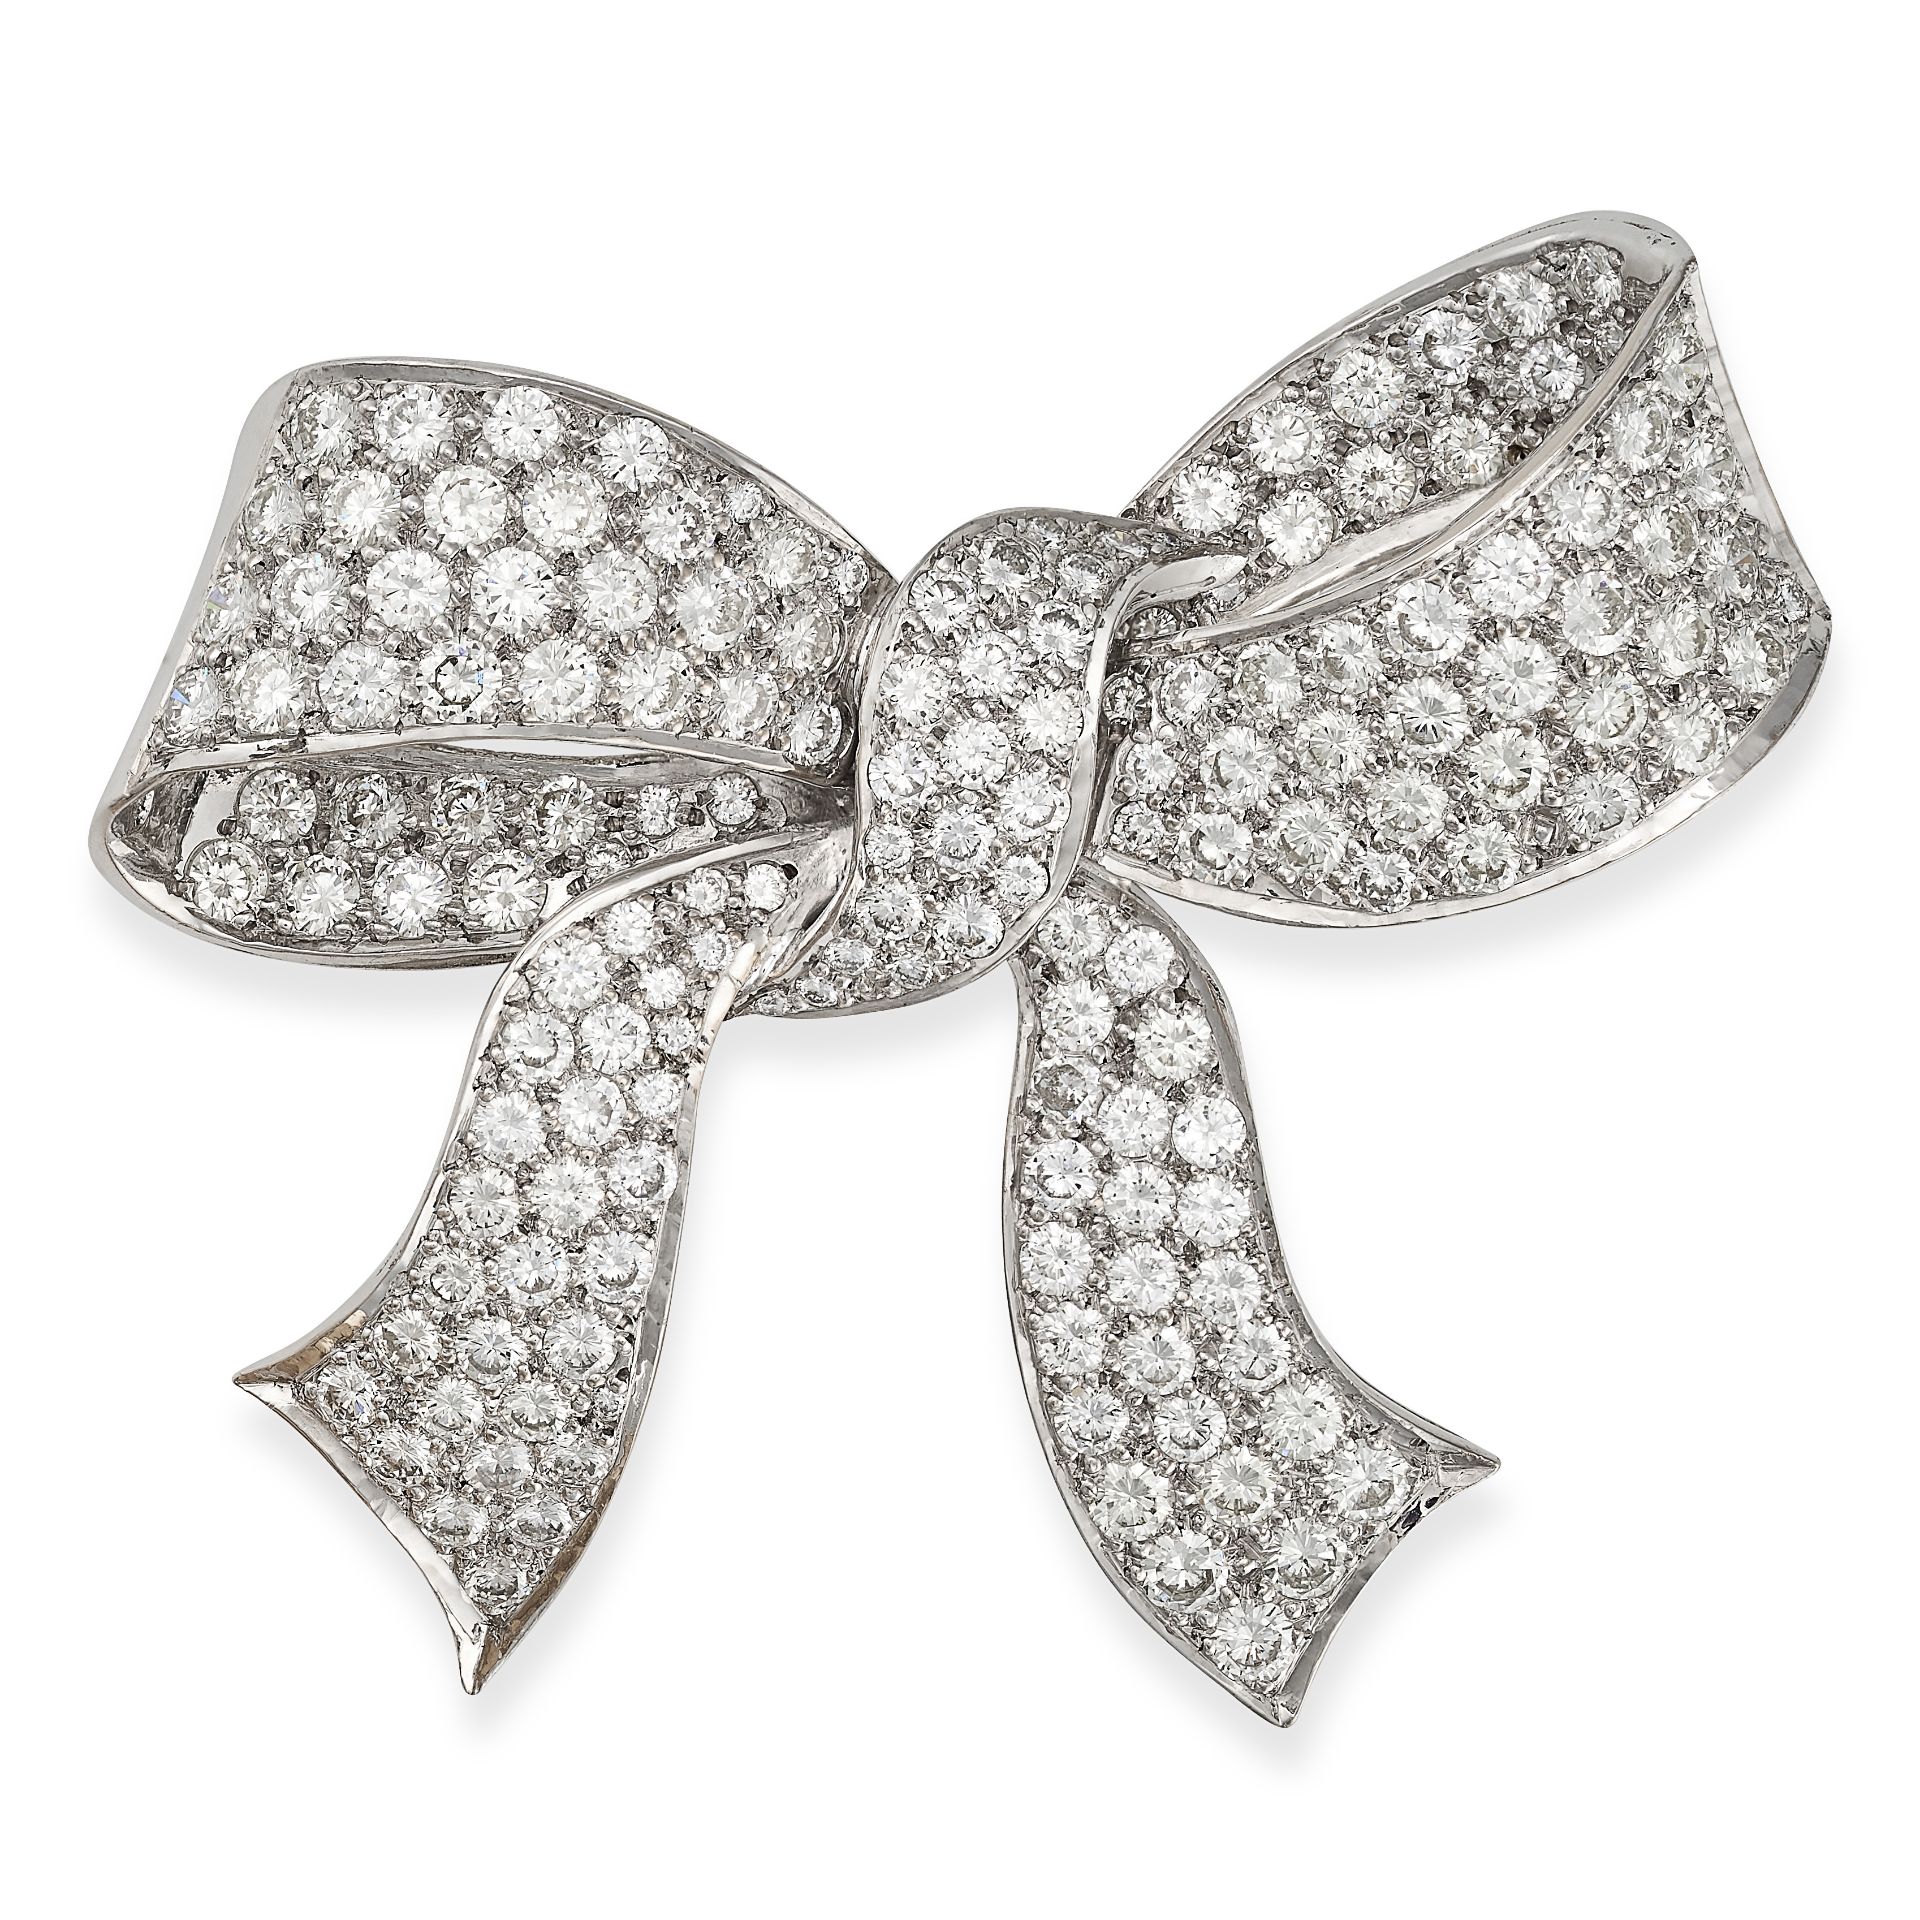 A FINE DIAMOND BOW BROOCH in 18ct white gold, designed as a ribbon tied into a bow, set throughout